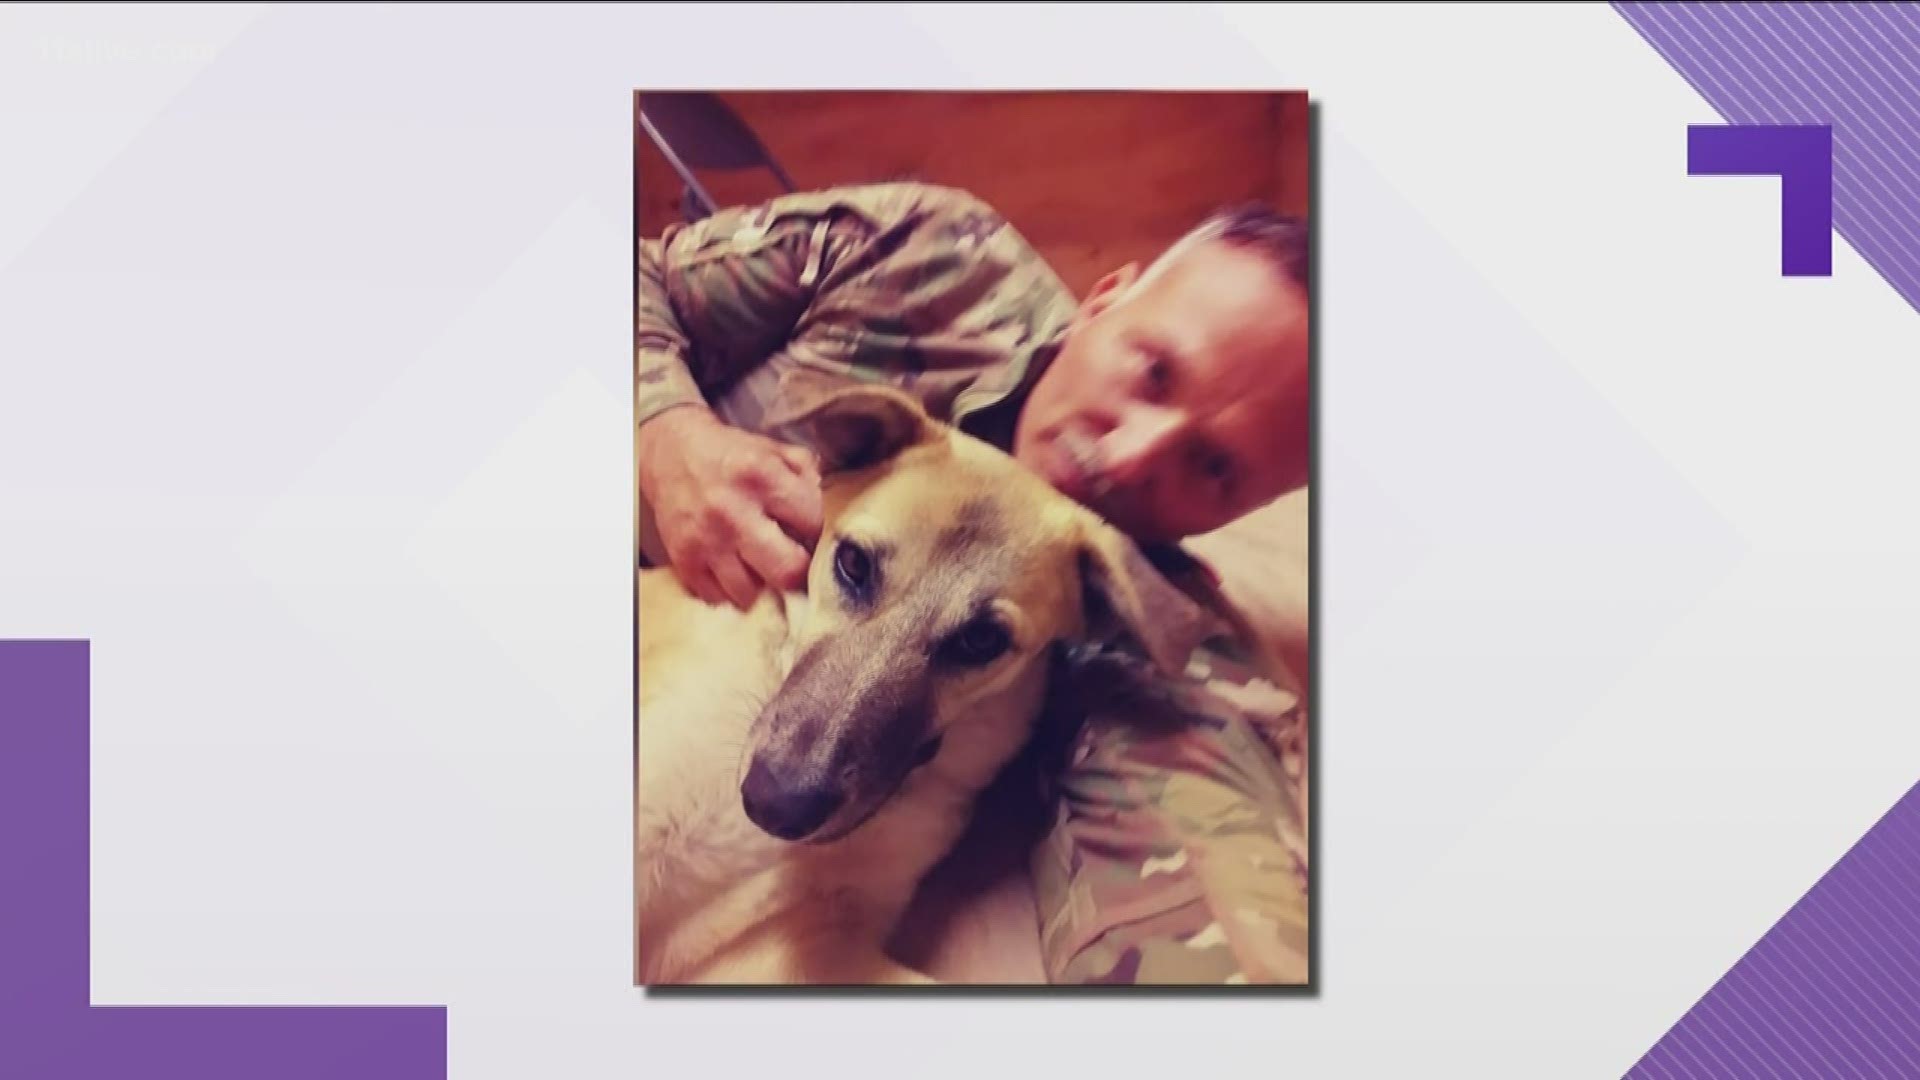 First Sergeant Timothy Boyd first met puppy Misha when she was recovering from horrific abuse. She had been rescued by American soldiers who saw her being dragged by a rope tied around her neck.